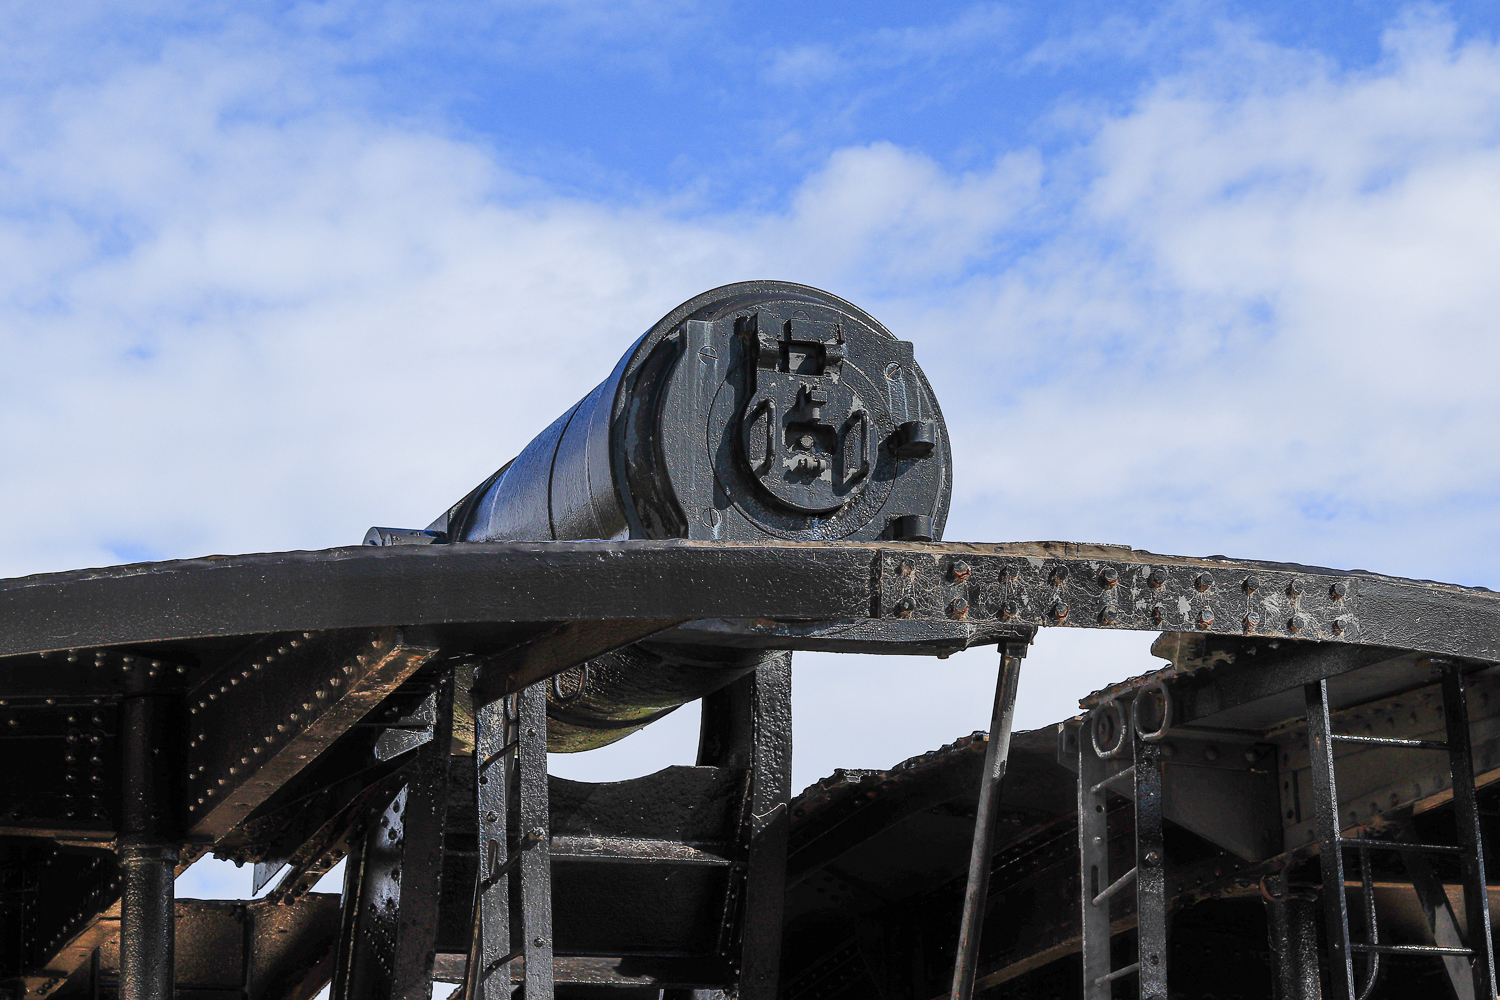 A close up of the back of a very large gun on a military base against blue sky